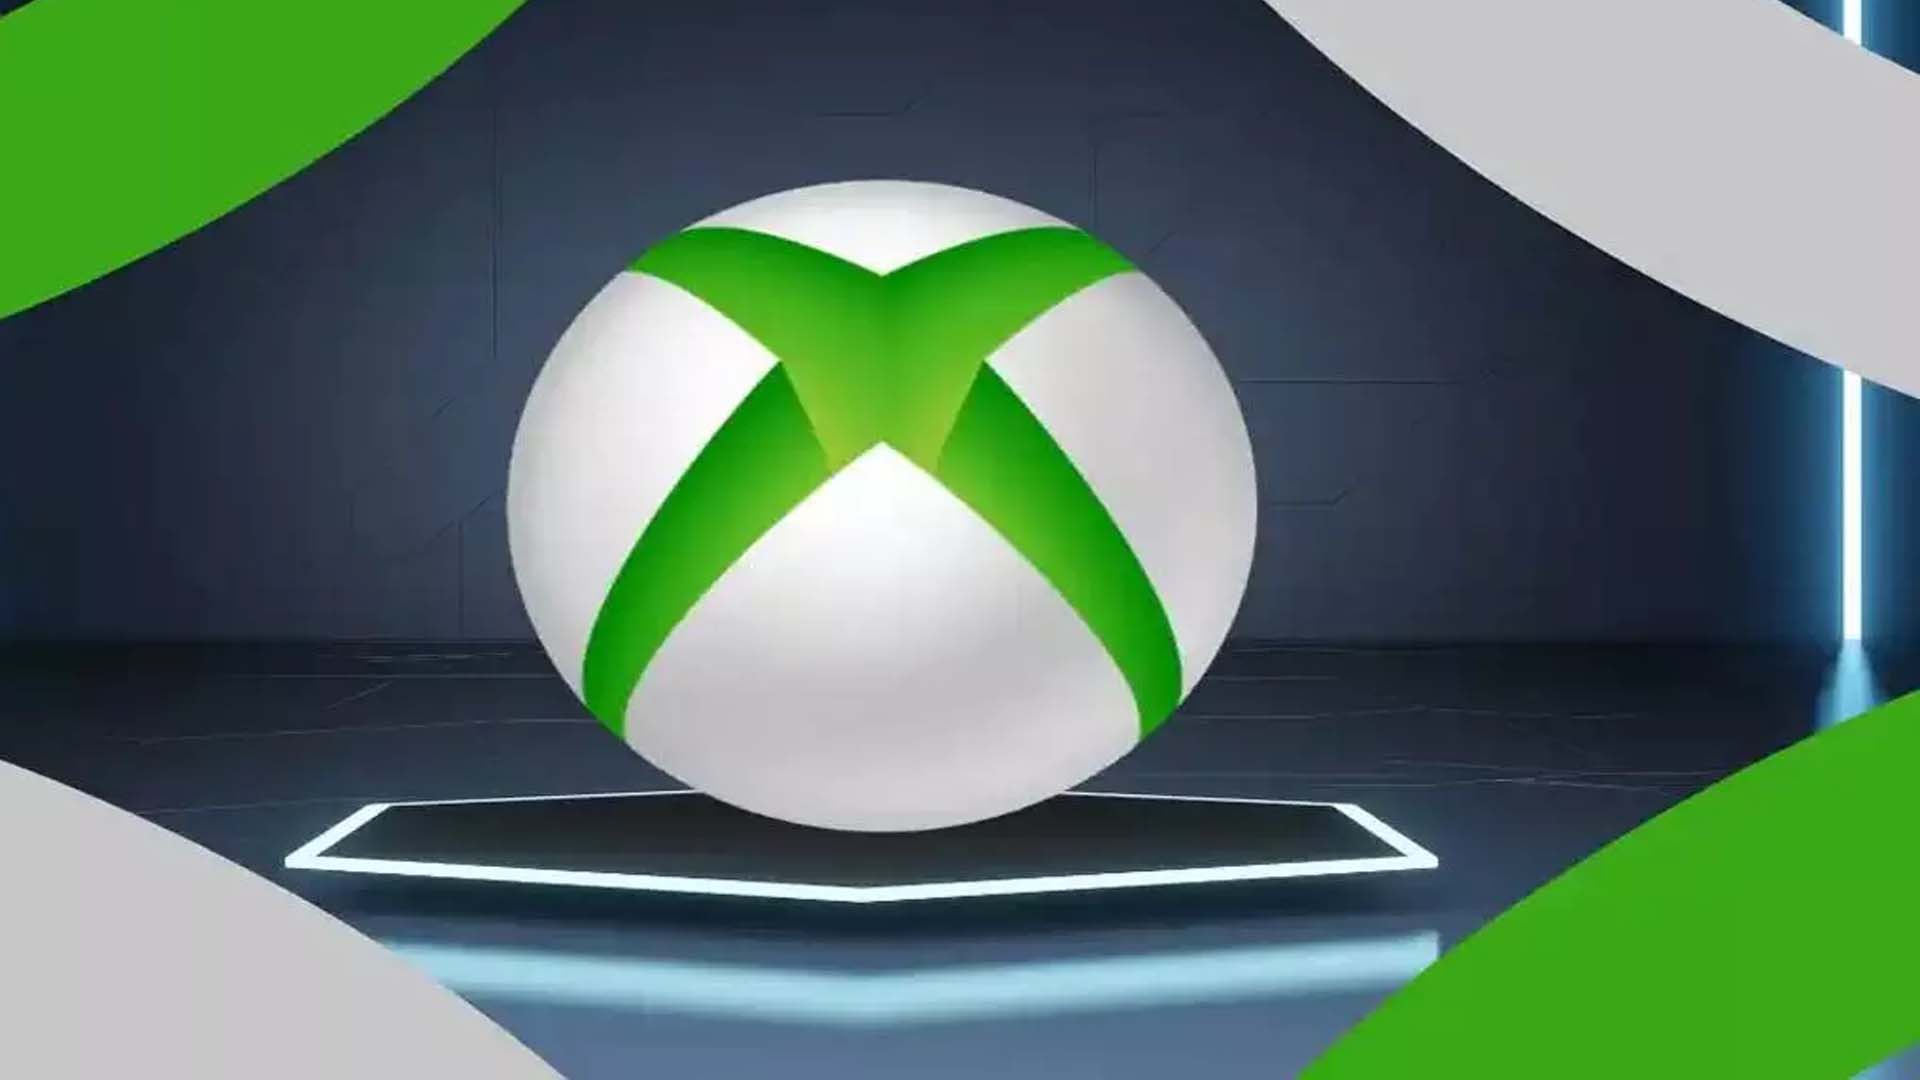 Microsoft Plans to Expand Xbox Games to PlayStation Revealed Next Week